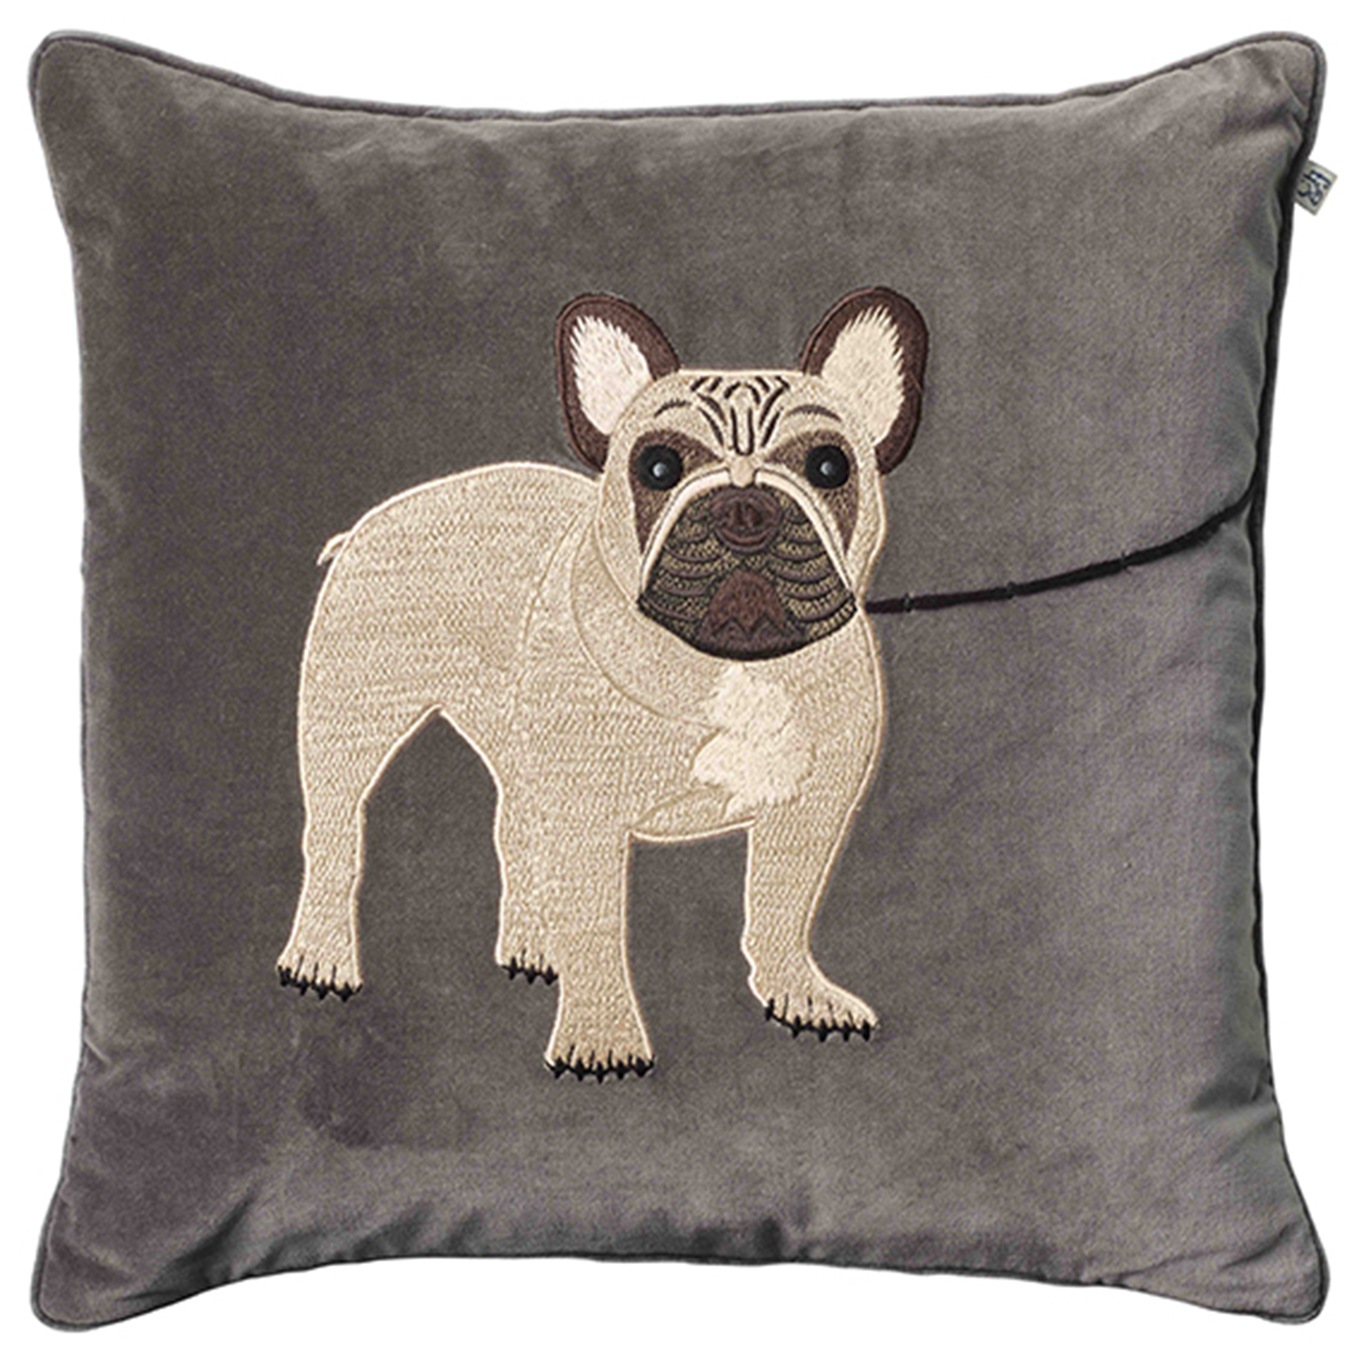 Embroidered French Bull Dog Cushion Cover 50x50 cm, Grey